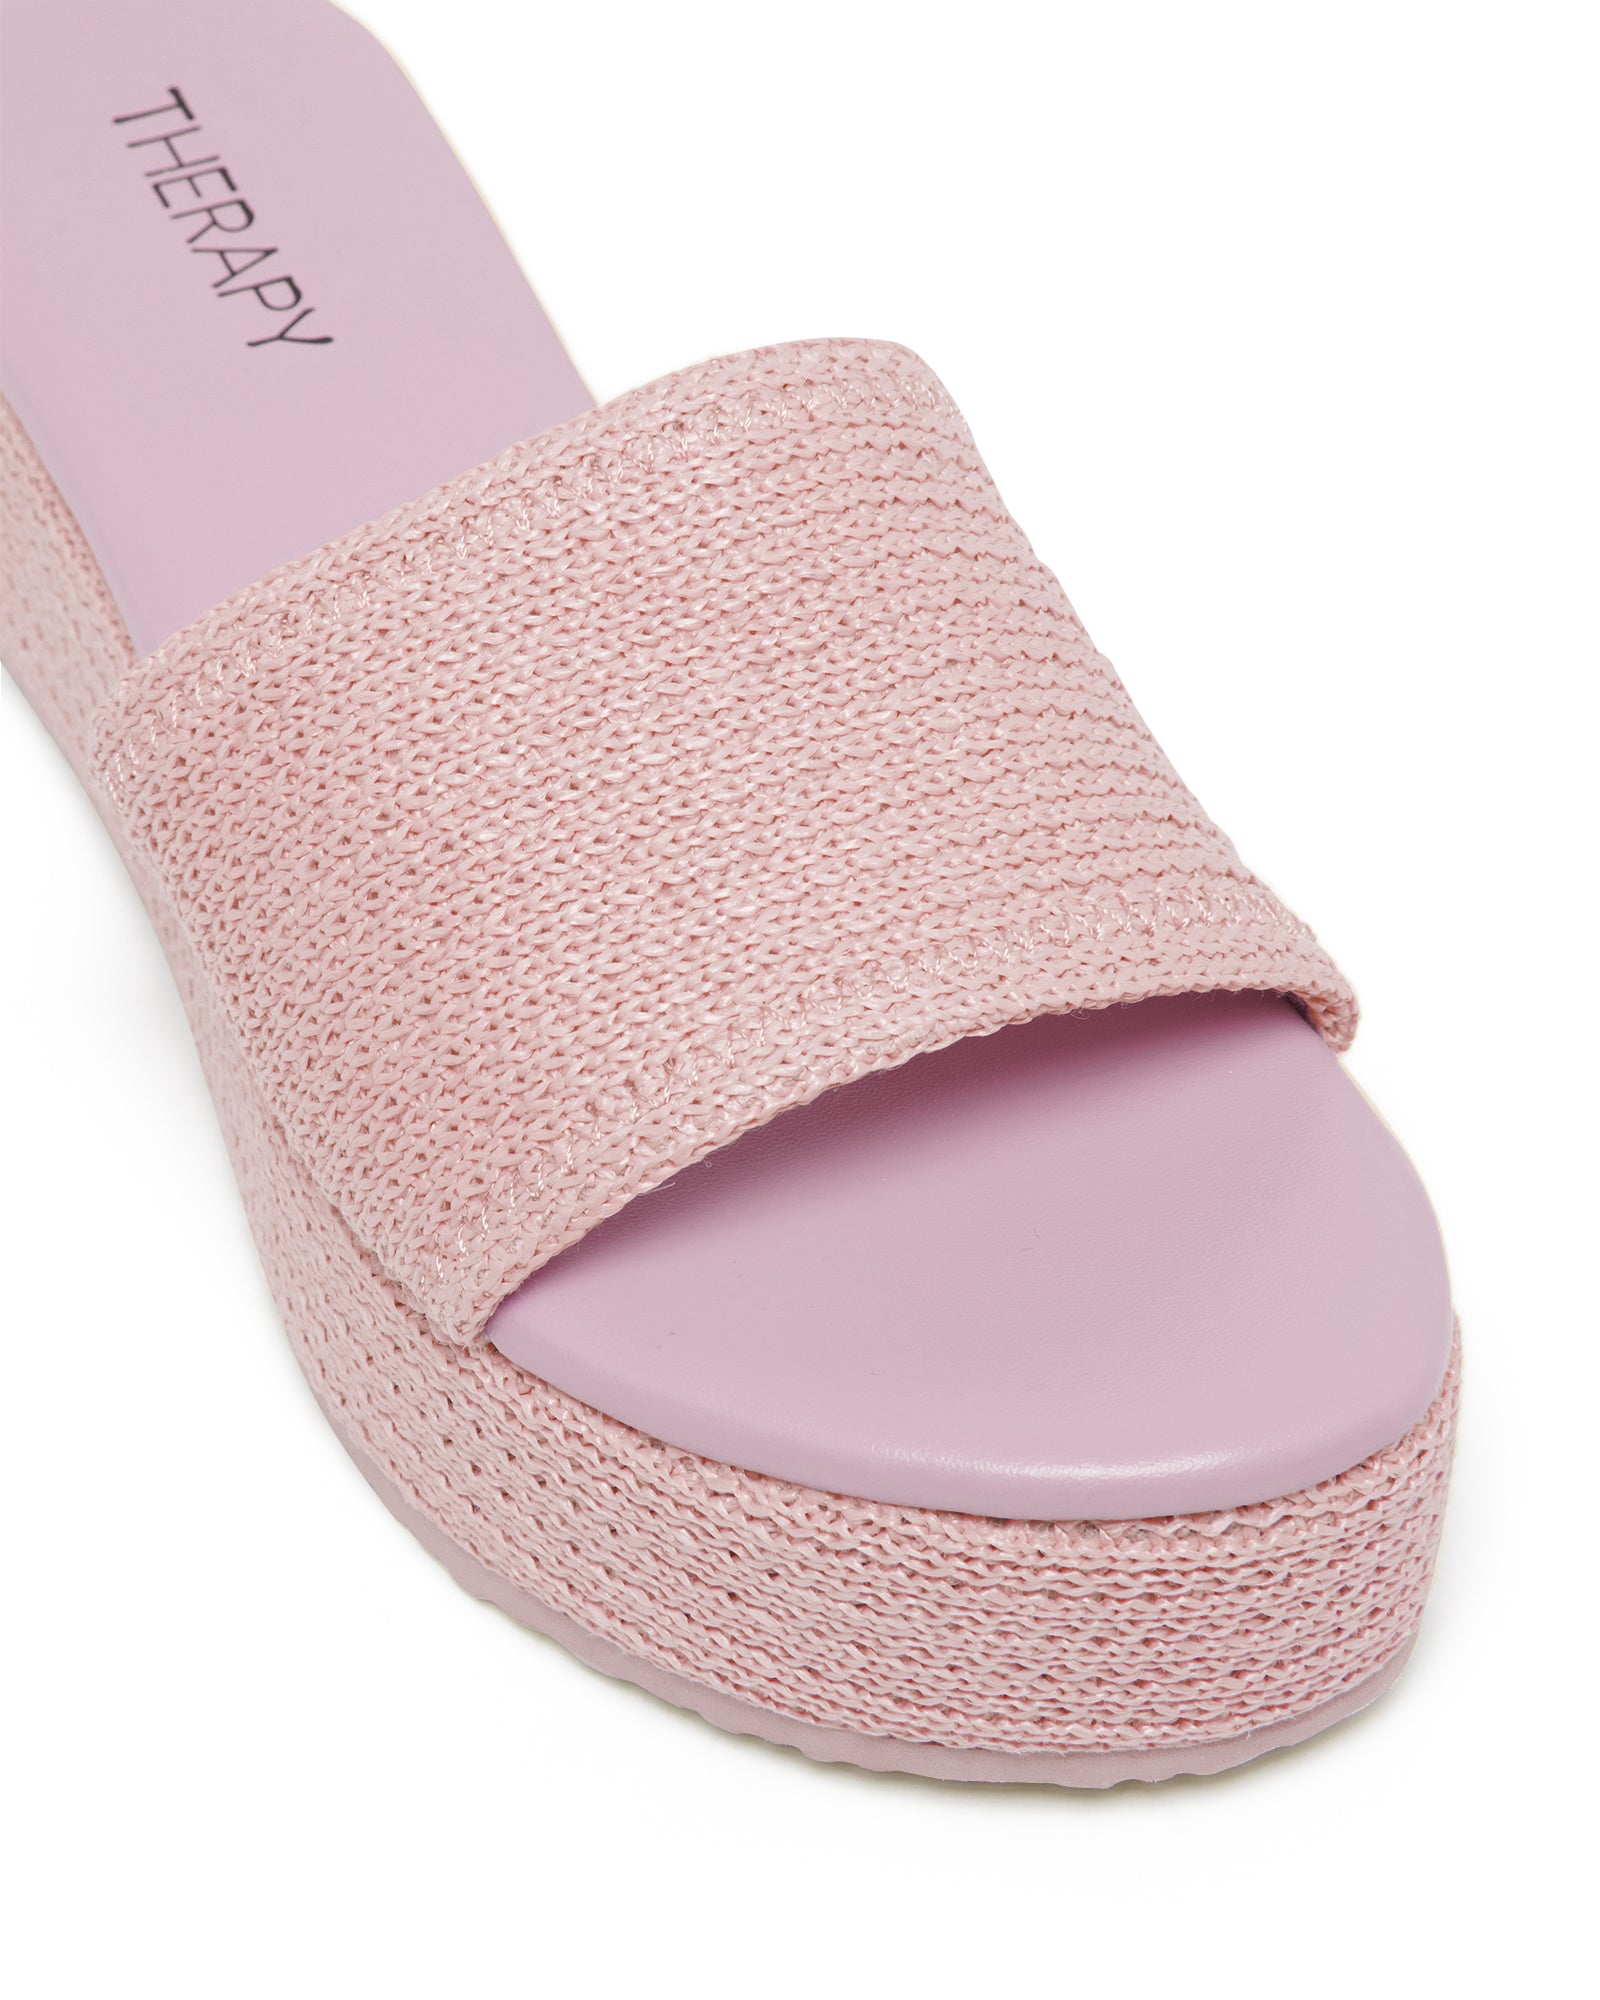 Therapy Shoes Avery Pink Raffia | Women's Sandals | Slides | Flatform